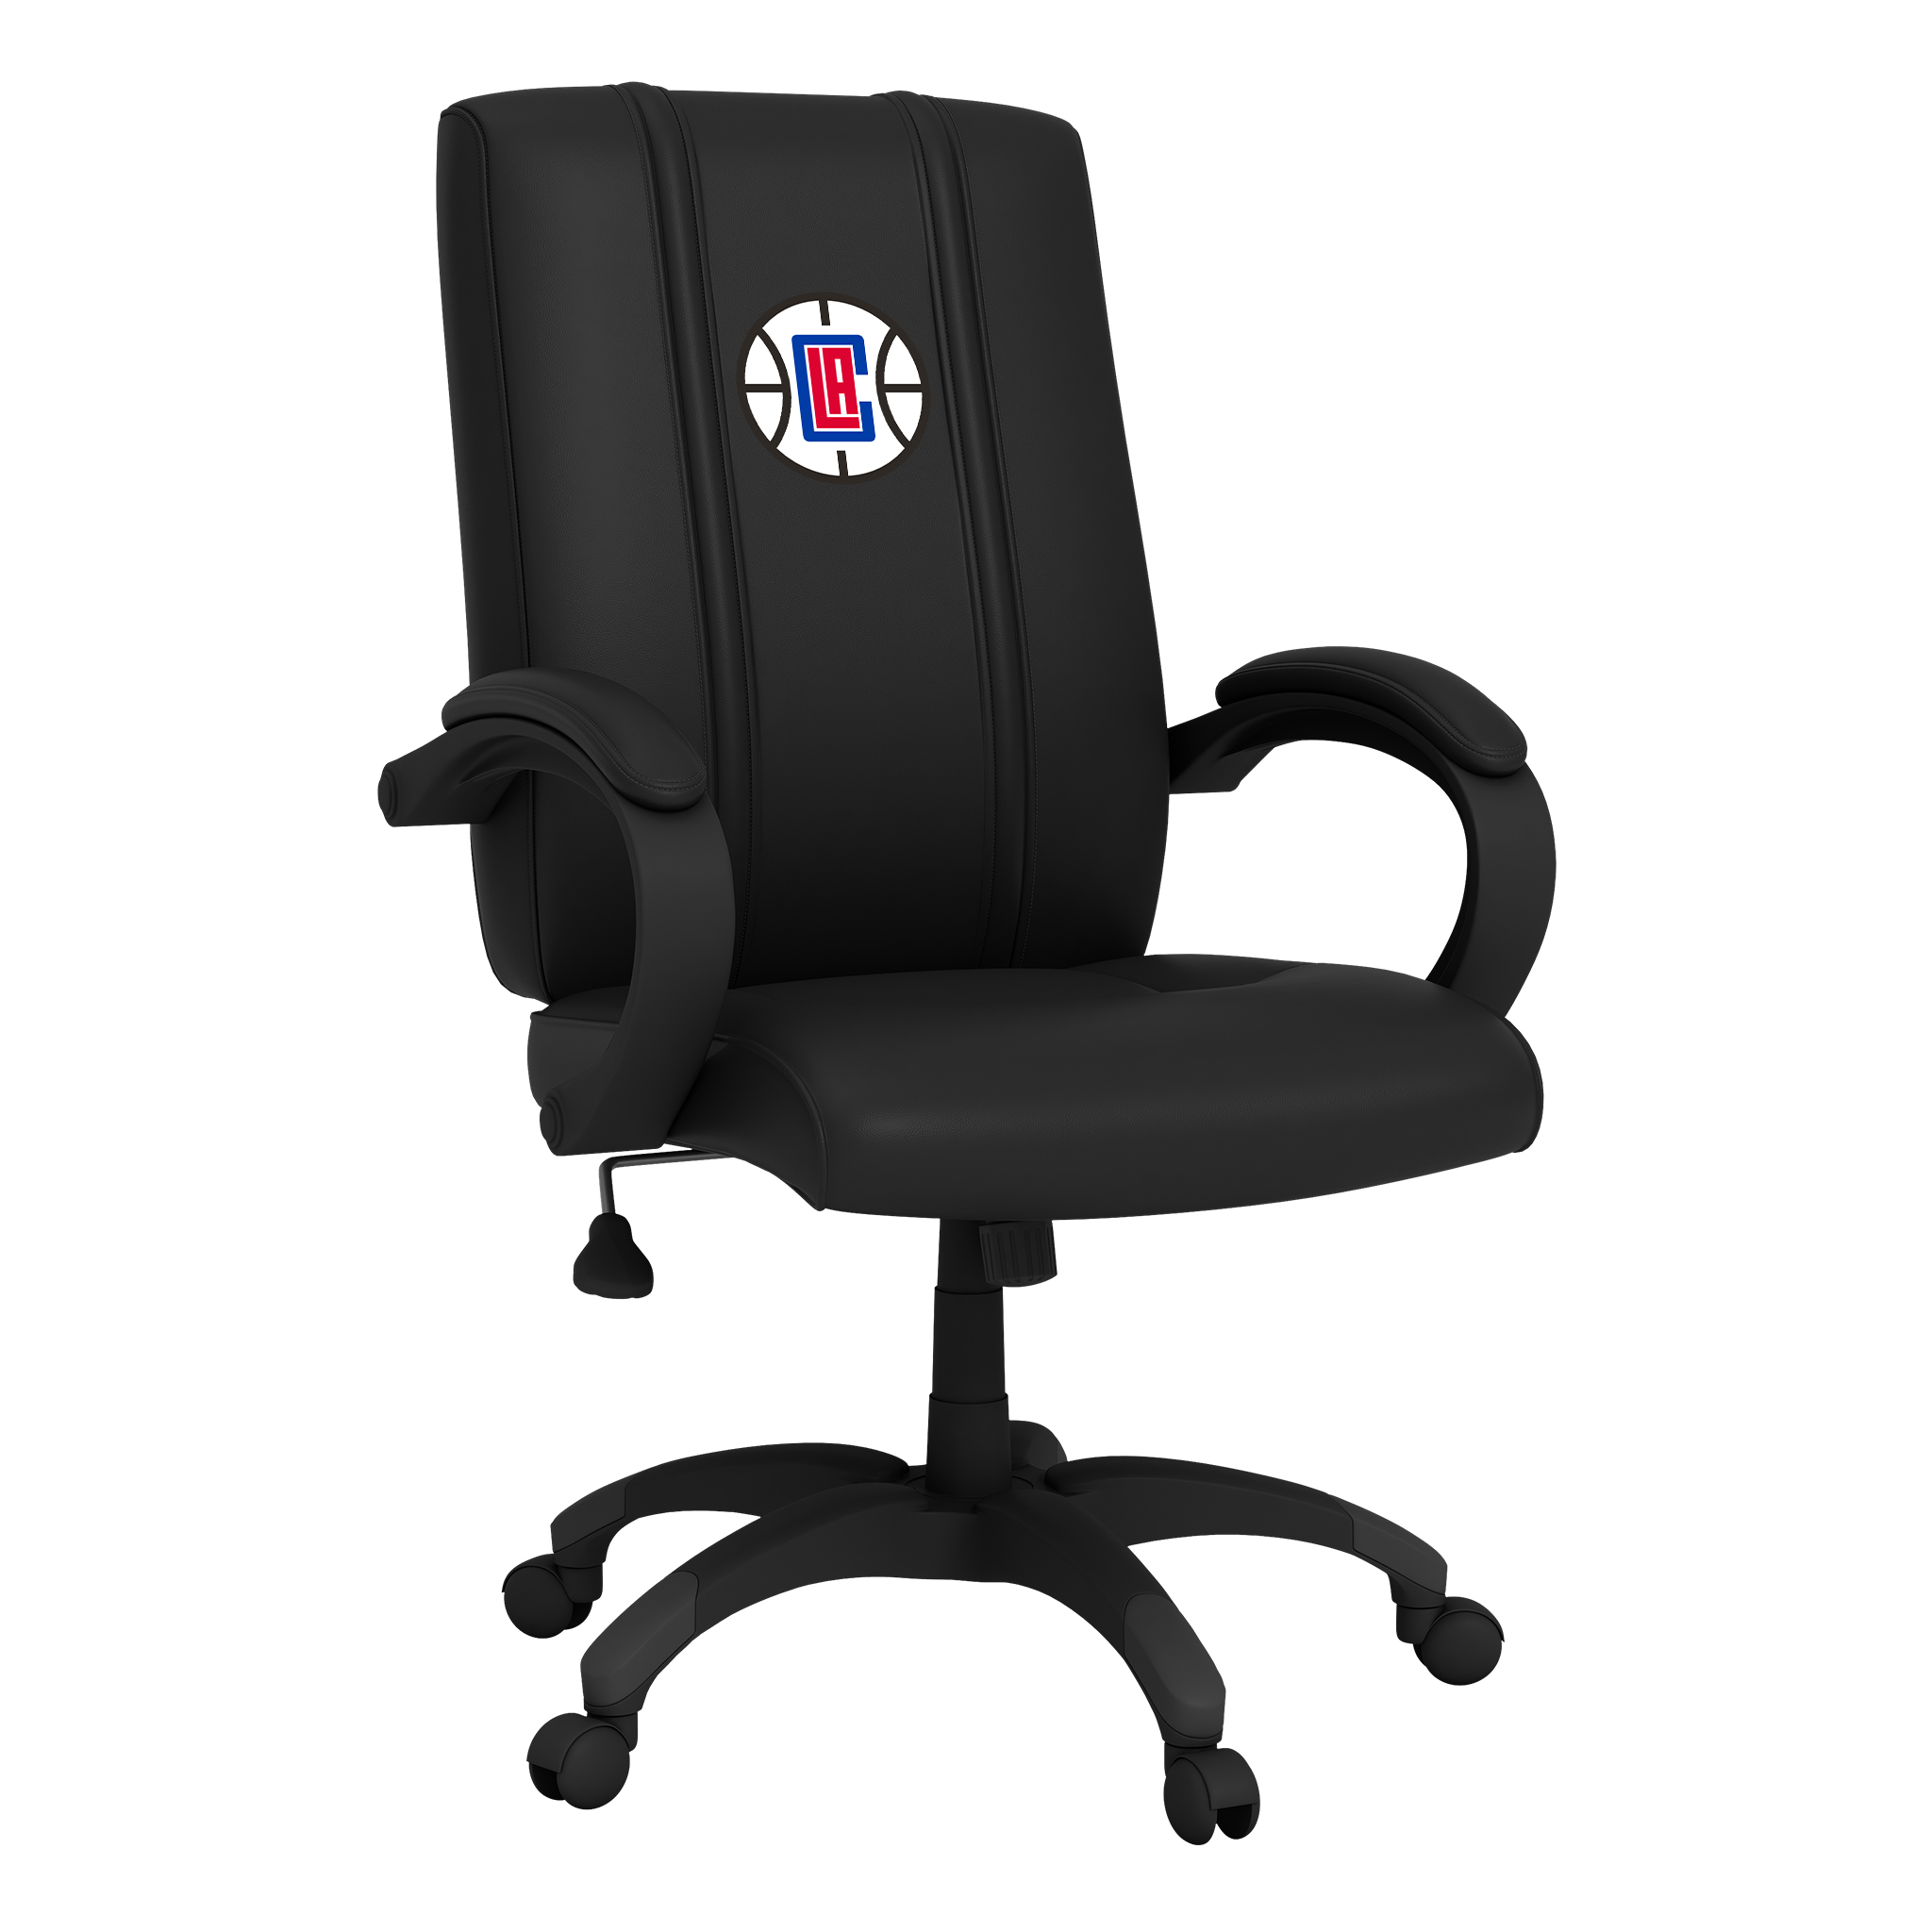 Los Angeles Clippers Office Chair 1000 with Los Angeles Clippers Primary